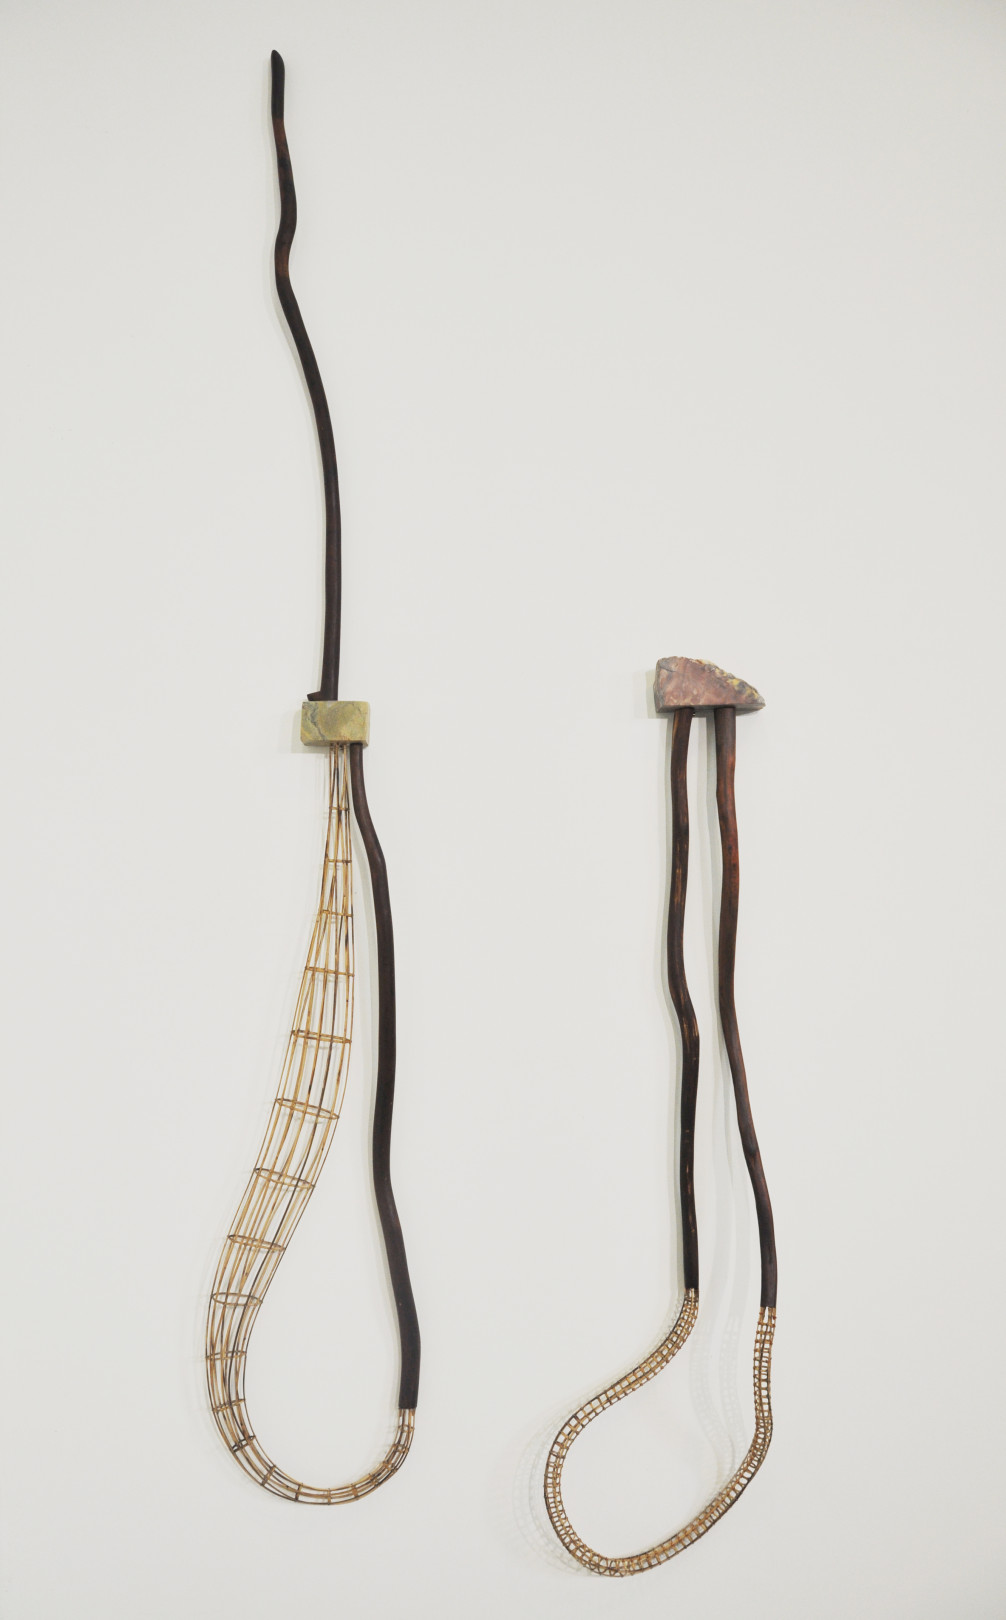 left: "Miroiise" 2017 / wood, marble, rattan, bamboo, metal wire / h.260.0 × w.36.0 × d.6.5 cm｜right: "Moonstone" 2017 / wood, bamboo, steel wire / h.155.0 × w.38.0 × d.16.0 cm